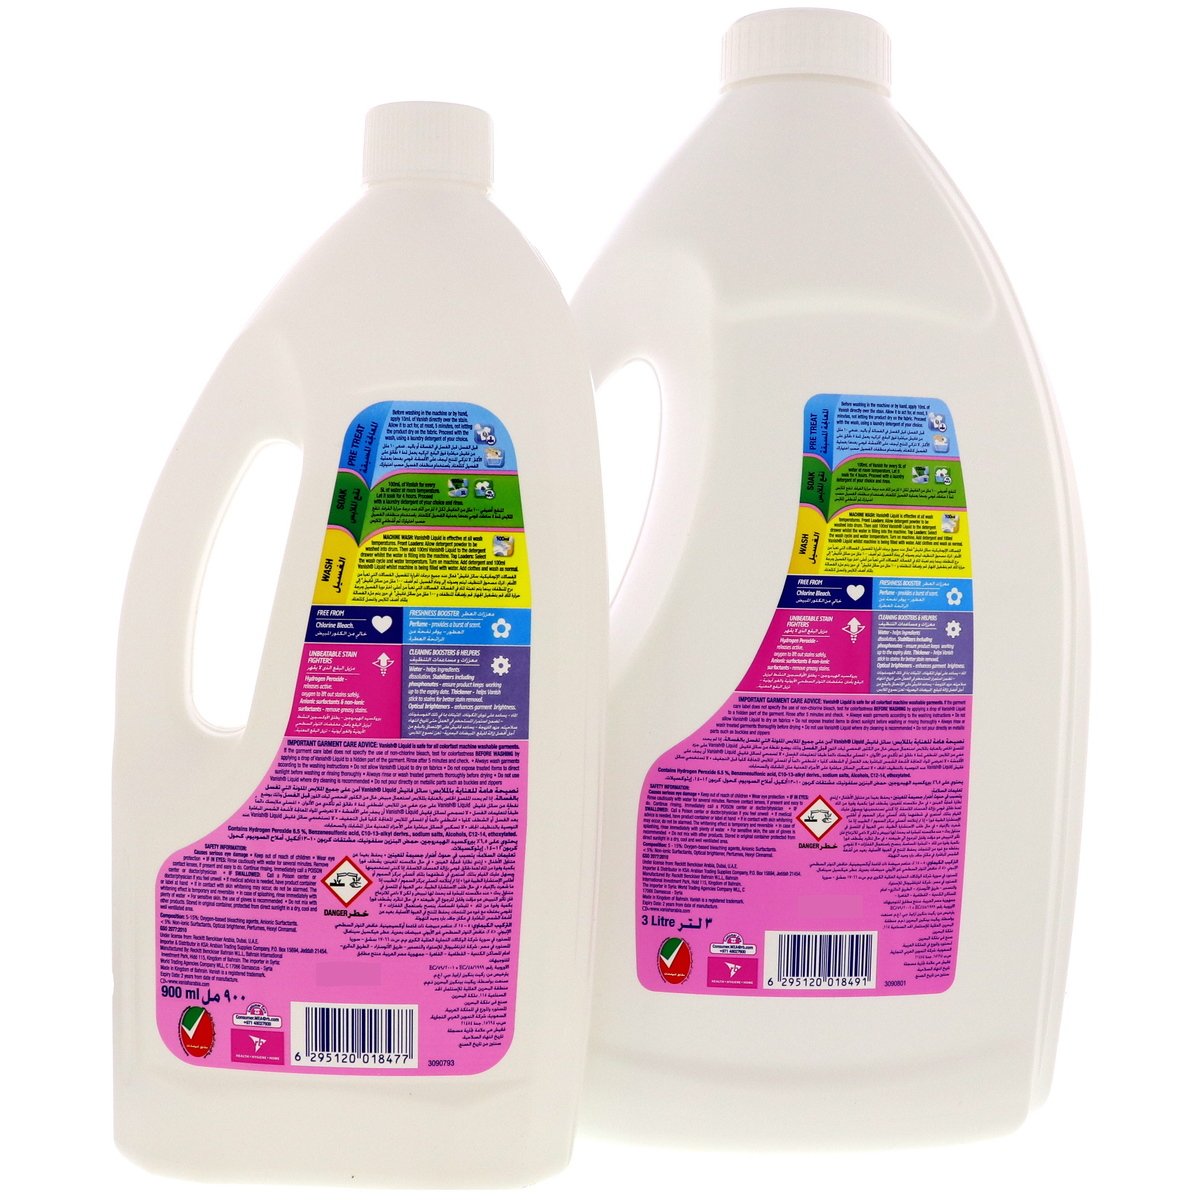 Vanish Fabric Stain Remover Crystal White 3Litre + 900ml